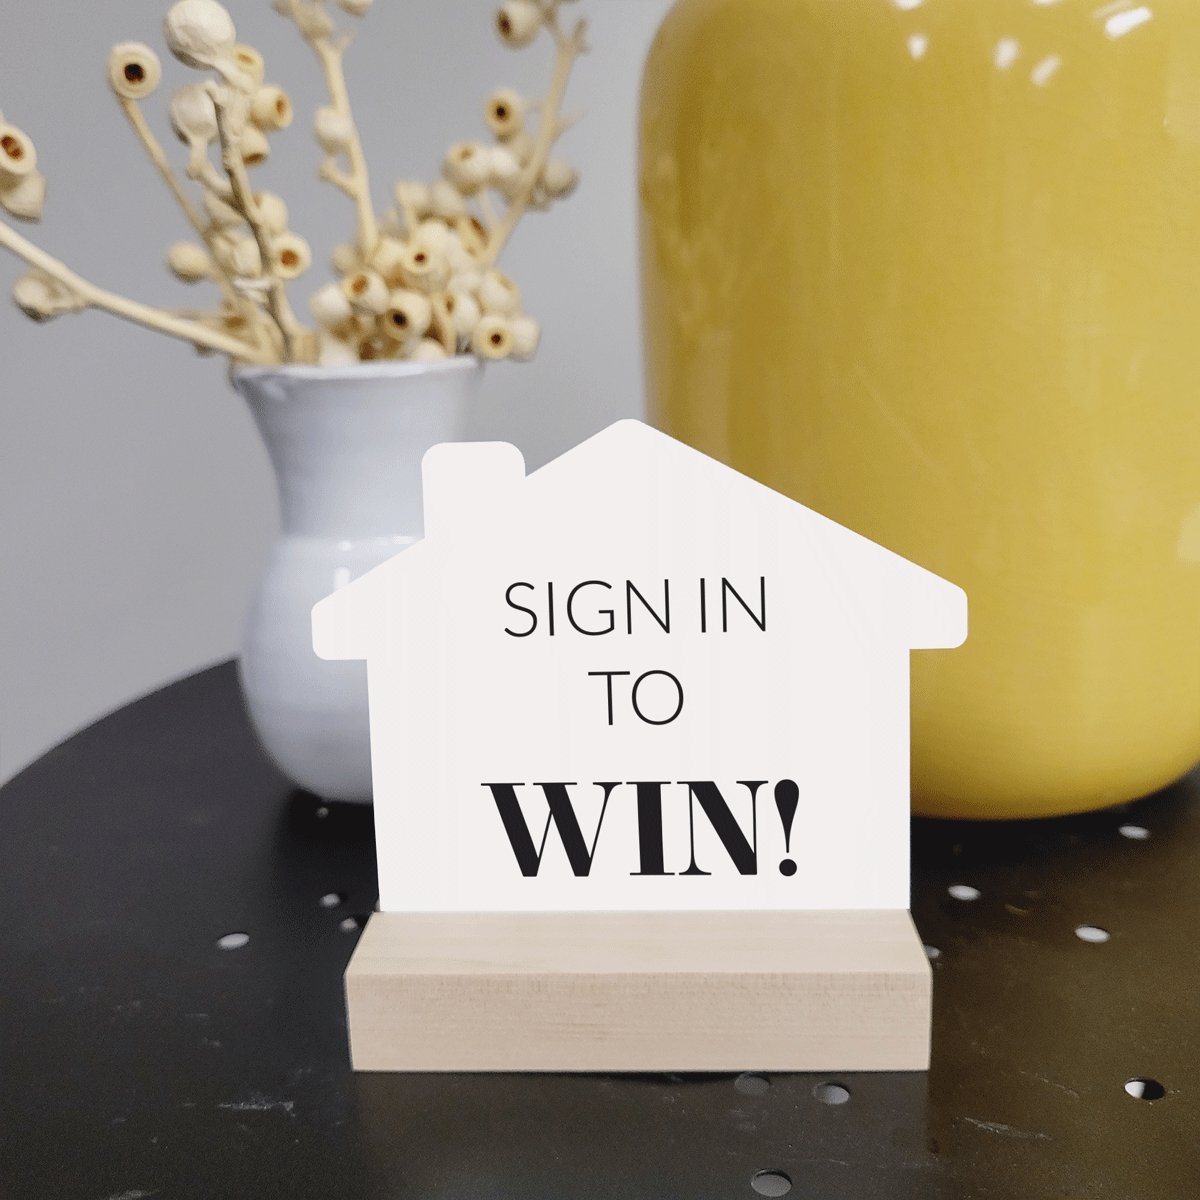 4x4 House - Sign In to WIN! - All Things Real Estate